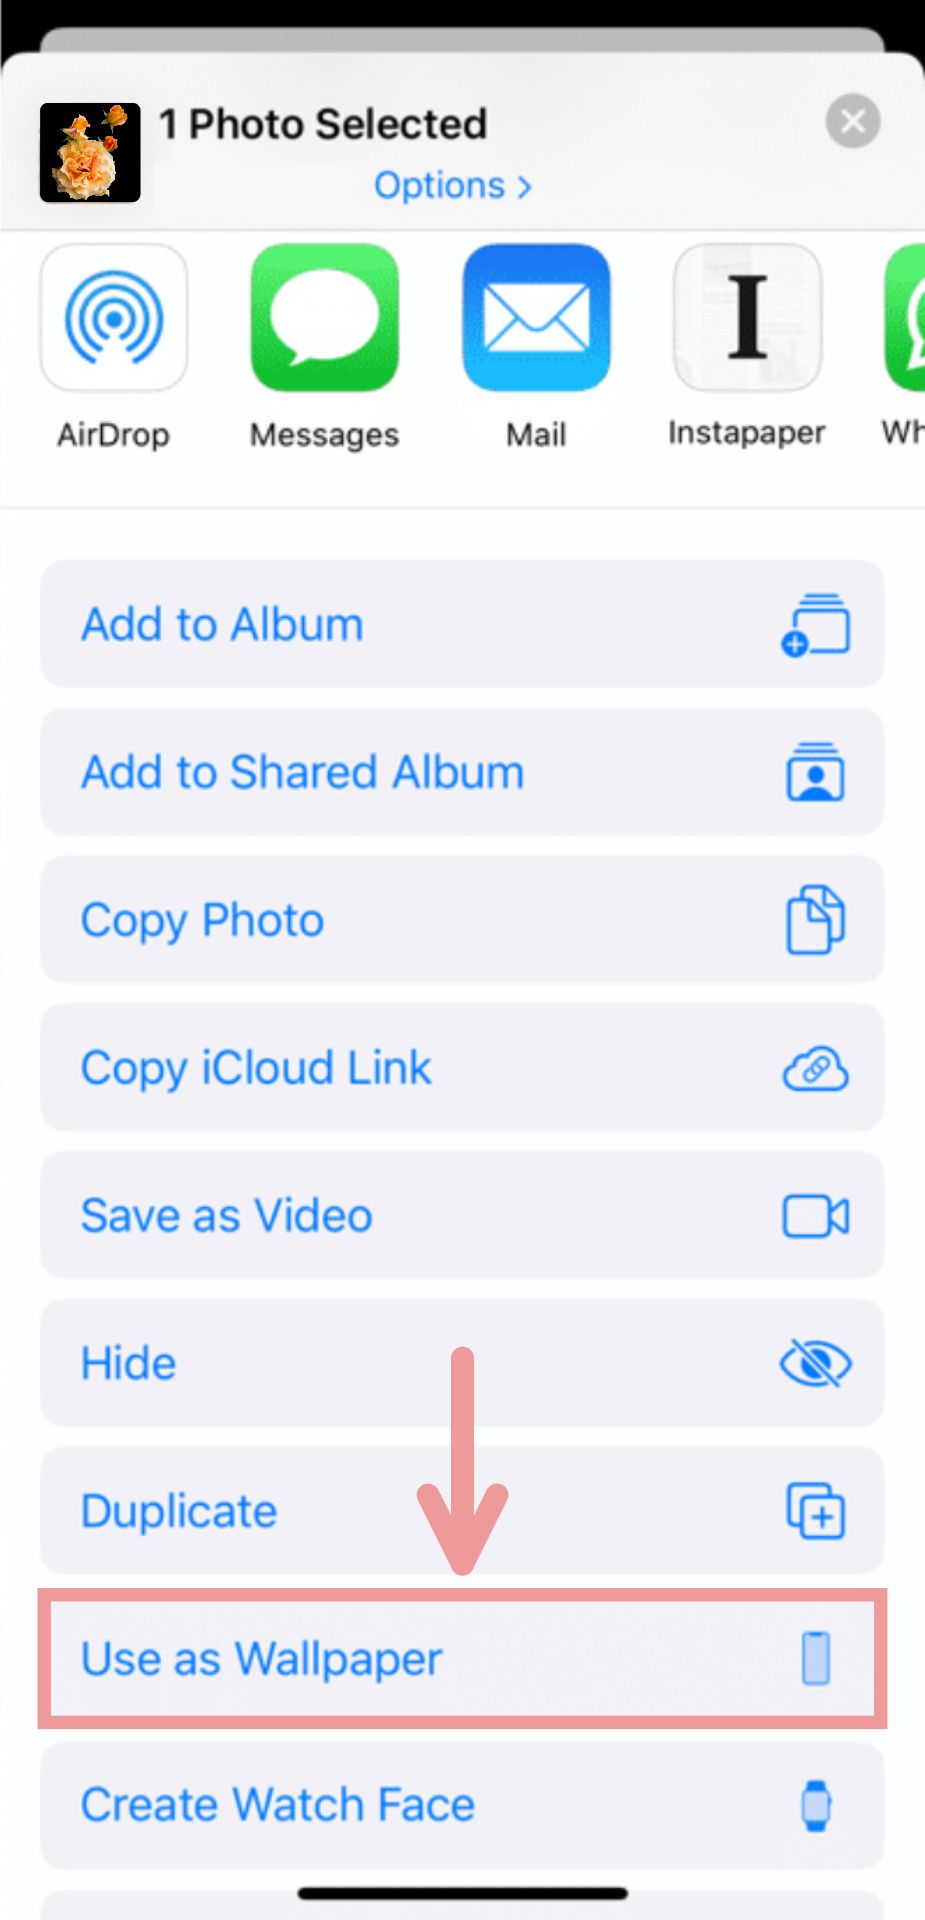 A screenshot showing how to use saved photos as wallpaper images on an iPhone. 